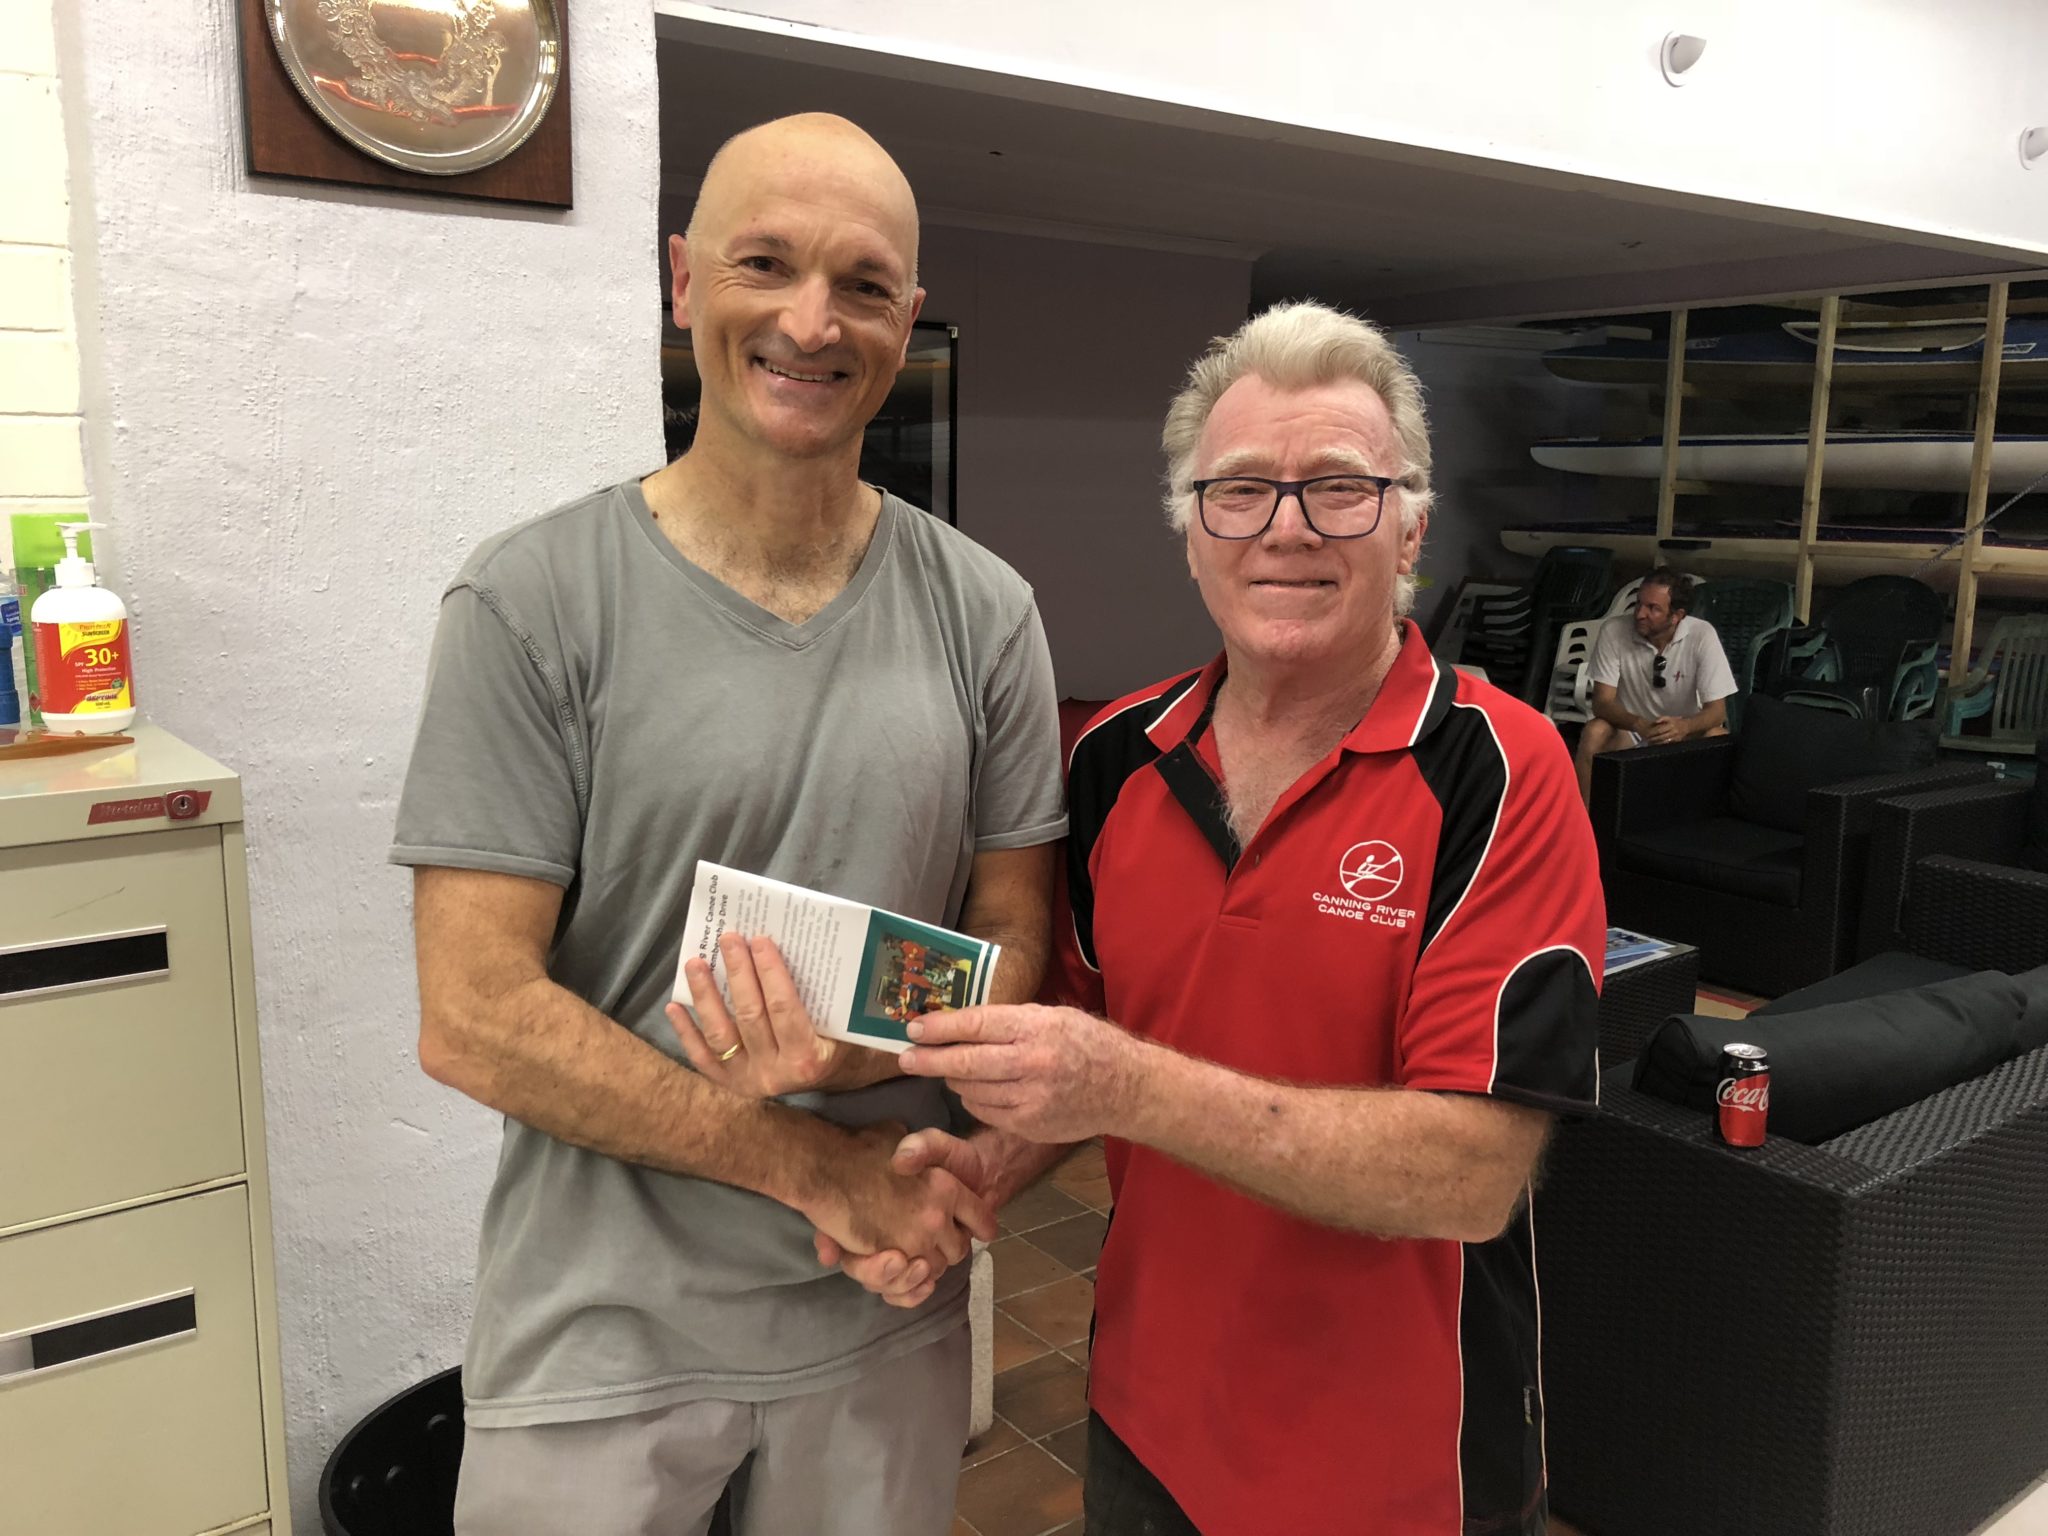 Tues 2nd Jan 2018 : Tonights photo shows Club Member David Gardiner presenting Carlo with a movie voucher